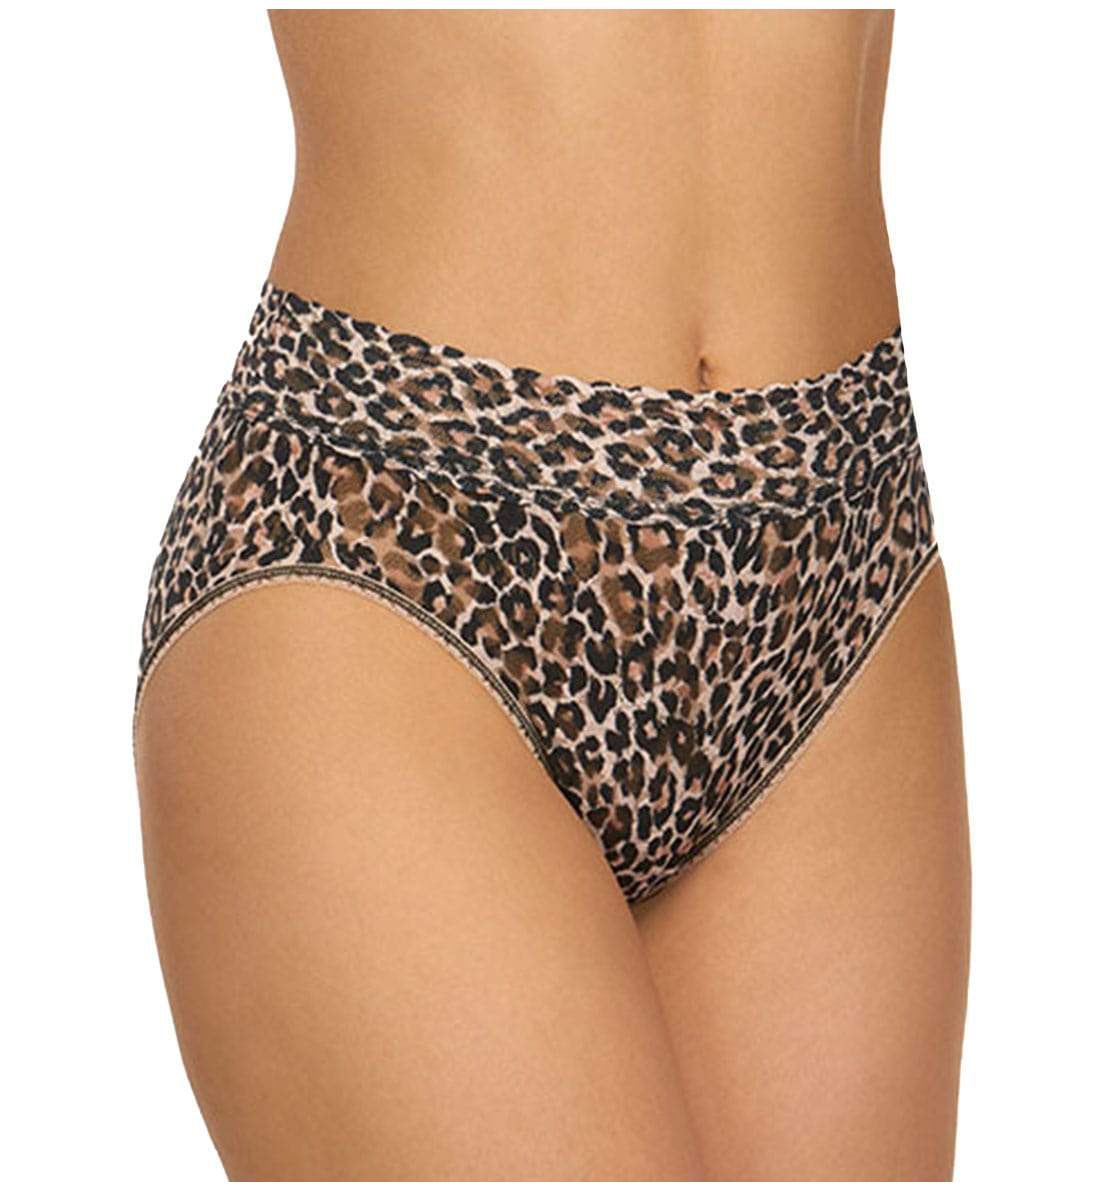 Hanky Panky Signature Lace Printed French Brief (PR461),Small,Brown/Black - Brown/Black,Small